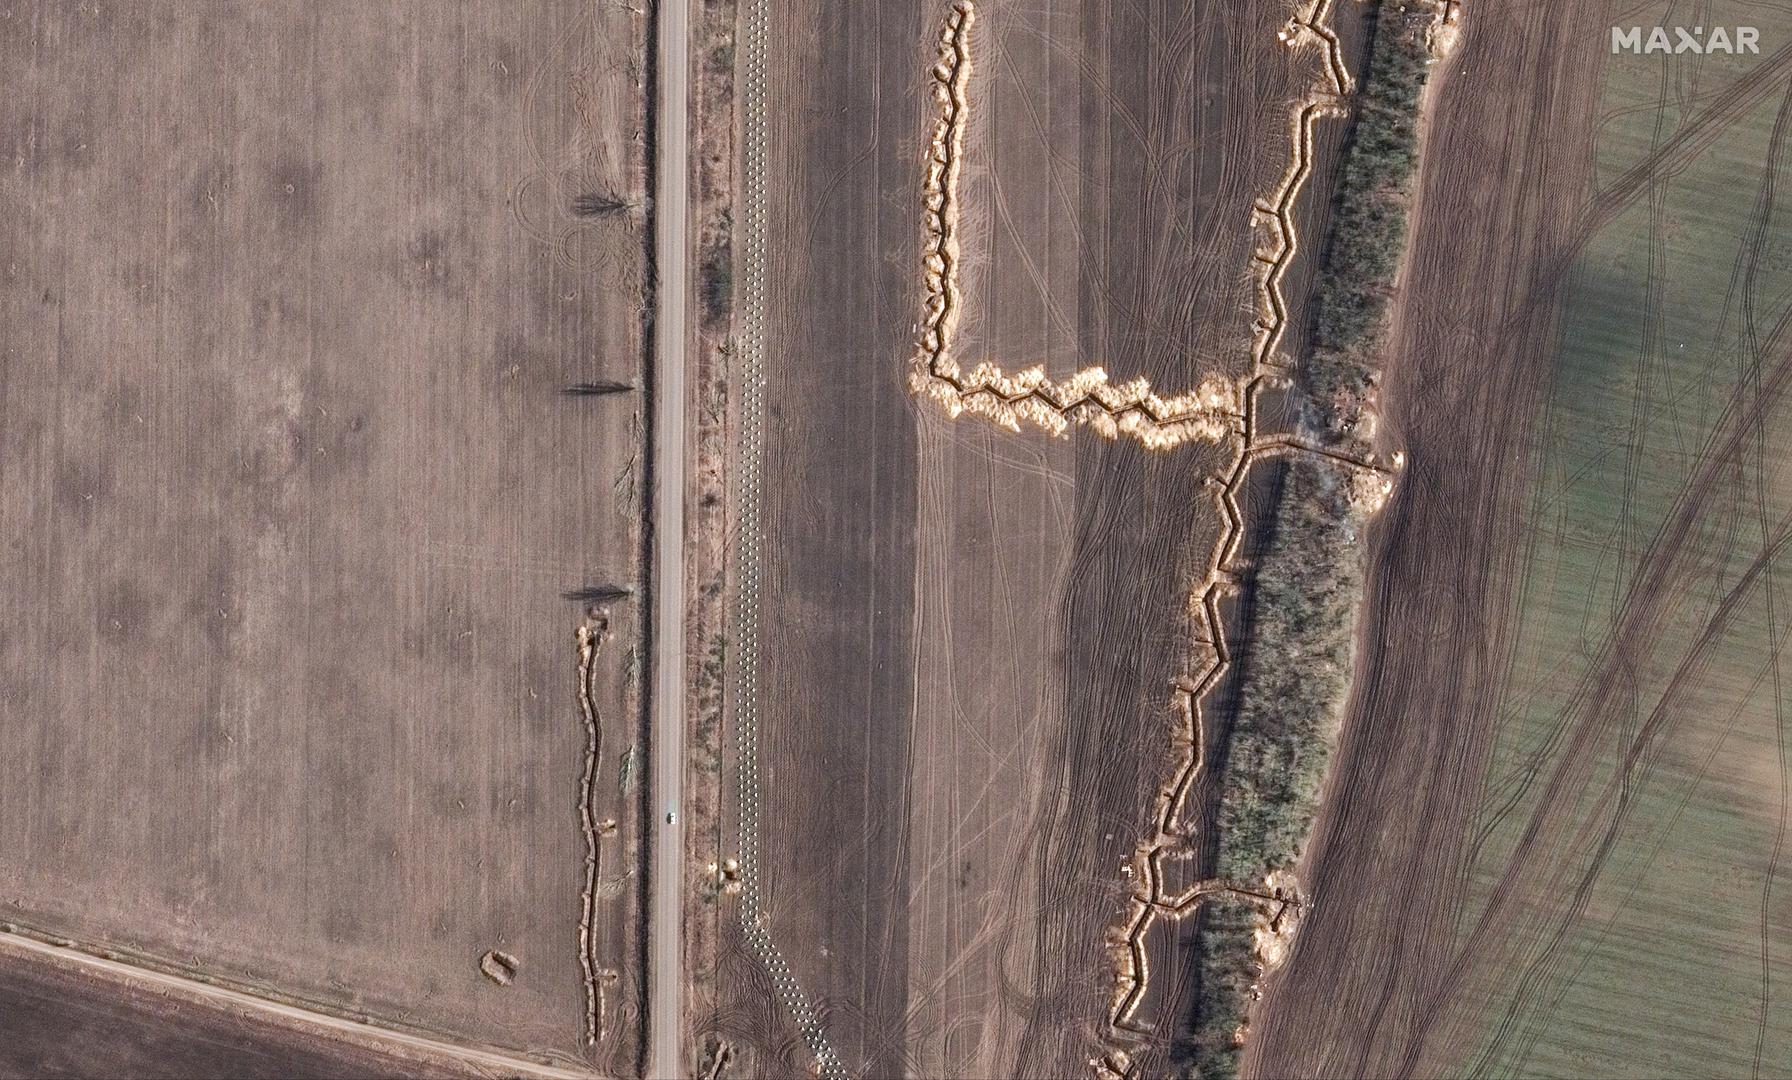 A satellite image shows an overview of rows of fortifications called "dragon's teeth" and trenches built by the Russian army in the Vasylivka district, amid Russia's attack on Ukraine, in Zaporizhzhia region, Ukraine, March 4, 2023. Maxar Technologies/Handout via REUTERS THIS IMAGE HAS BEEN SUPPLIED BY A THIRD PARTY. NO RESALES. NO ARCHIVES. MANDATORY CREDIT. DO NOT OBSCURE LOGO  REFILE - CORRECTING DATE FROM "NOVEMBER 15, 2022" TO "MARCH 4, 2023\ Photo: MAXAR TECHNOLOGIES/REUTERS